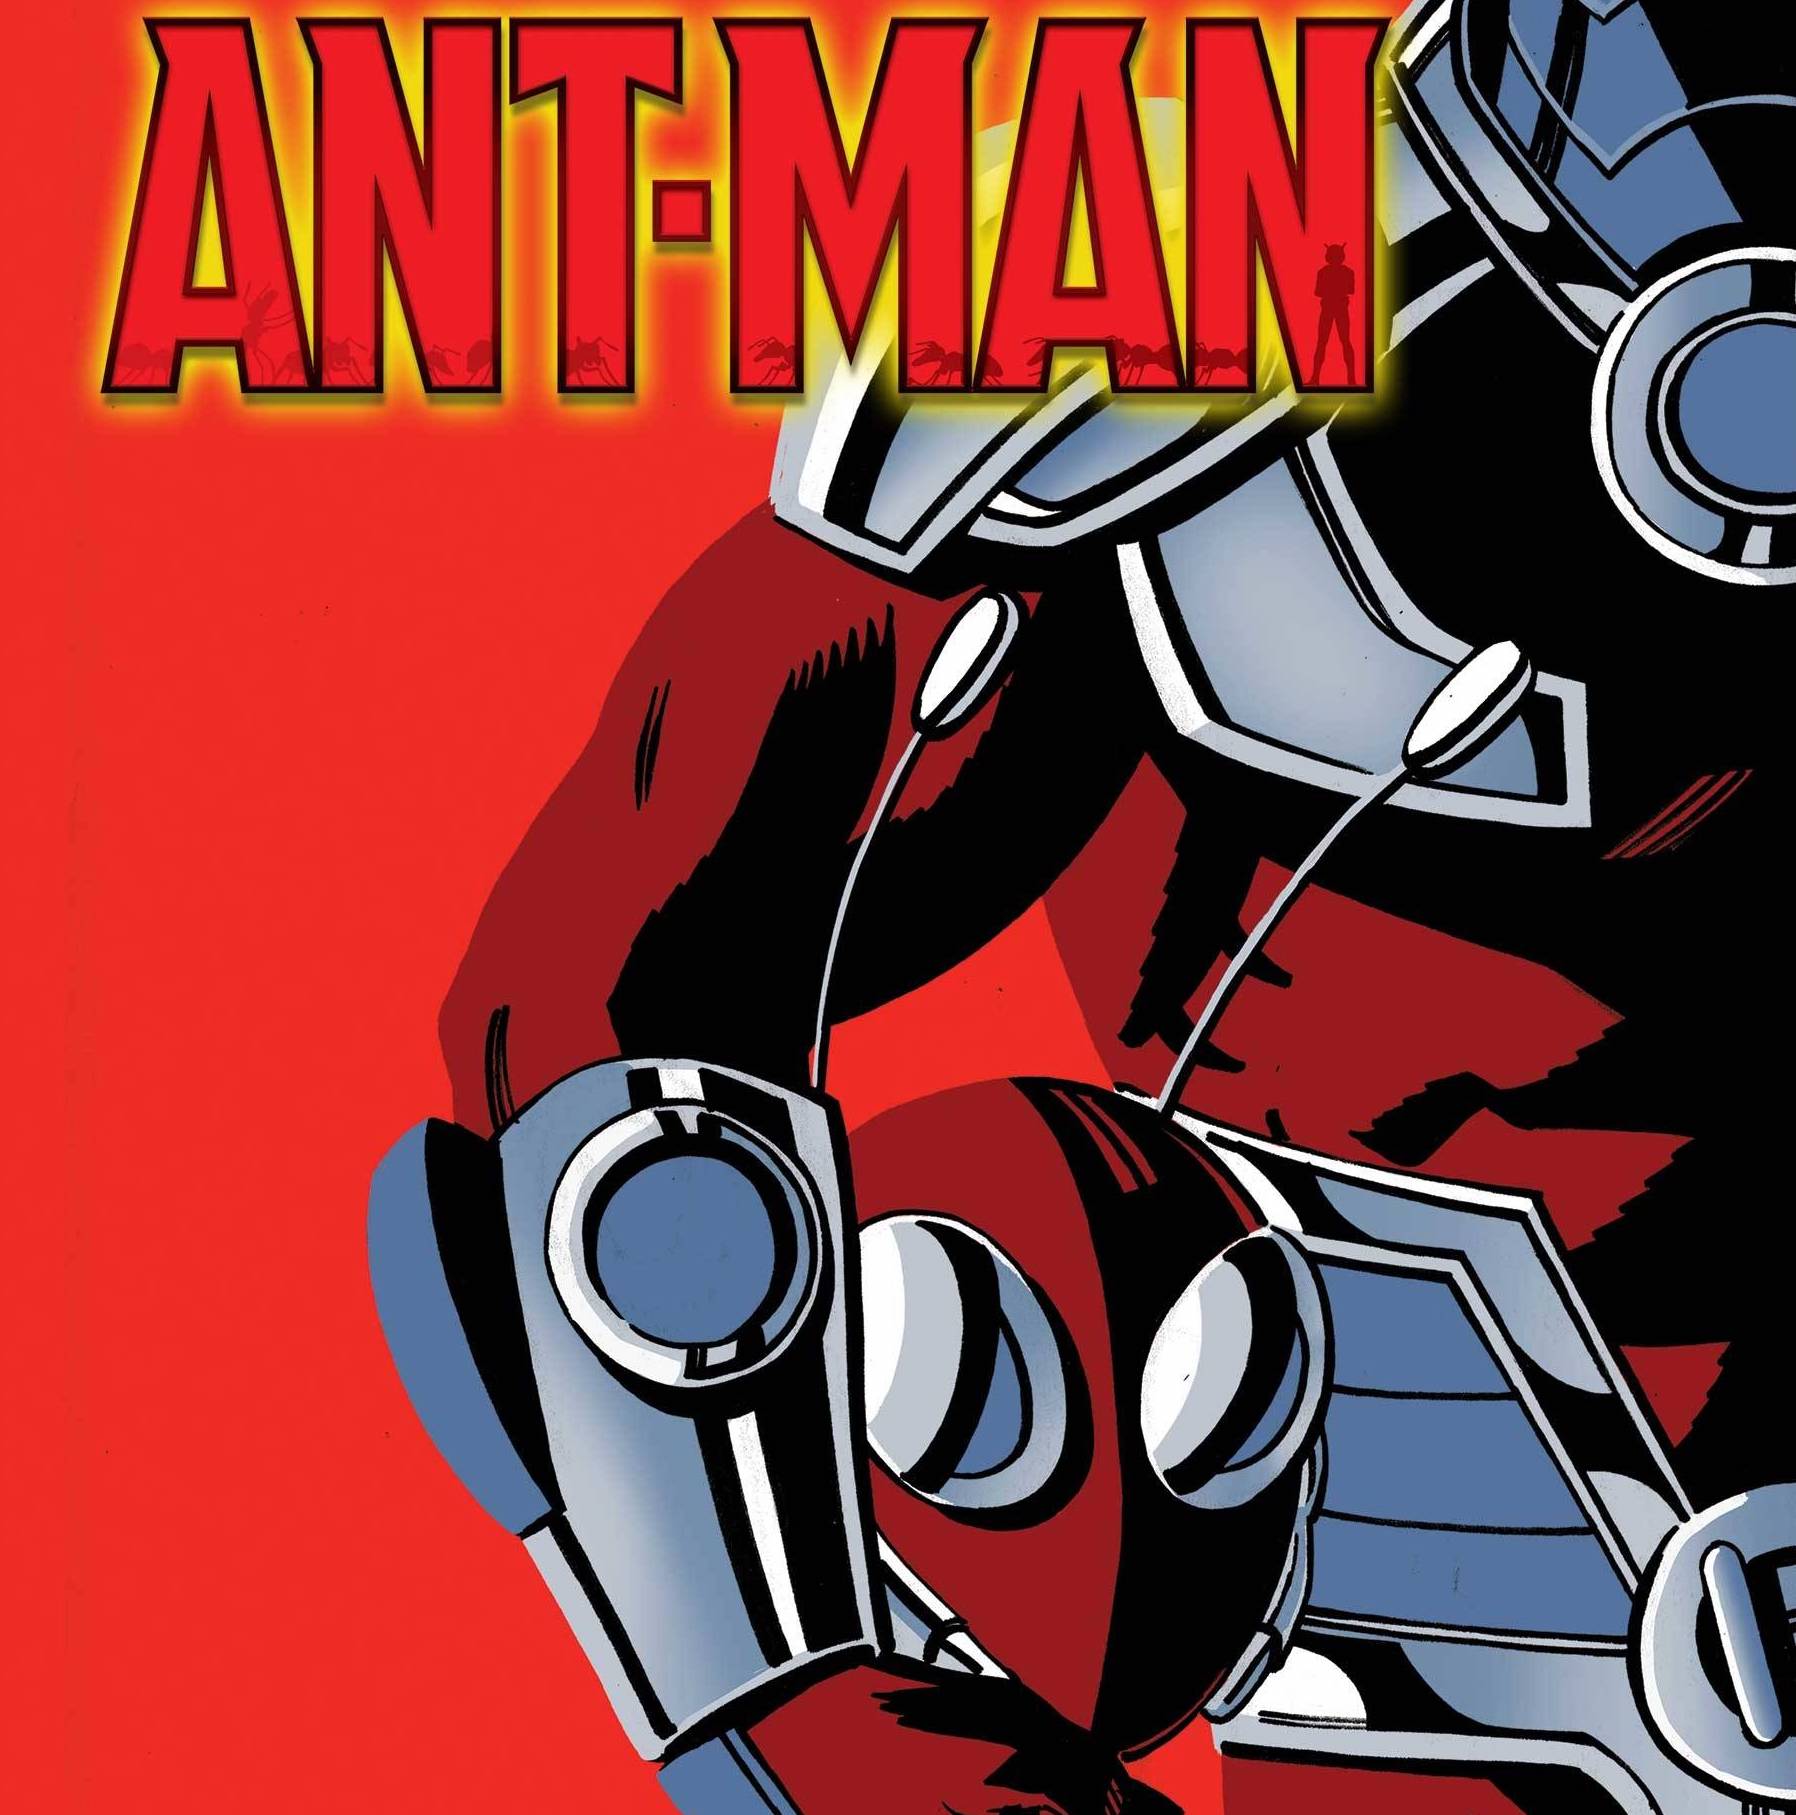 'Ant-Man' #2 pays tribute to Eric O’Grady and the '90s